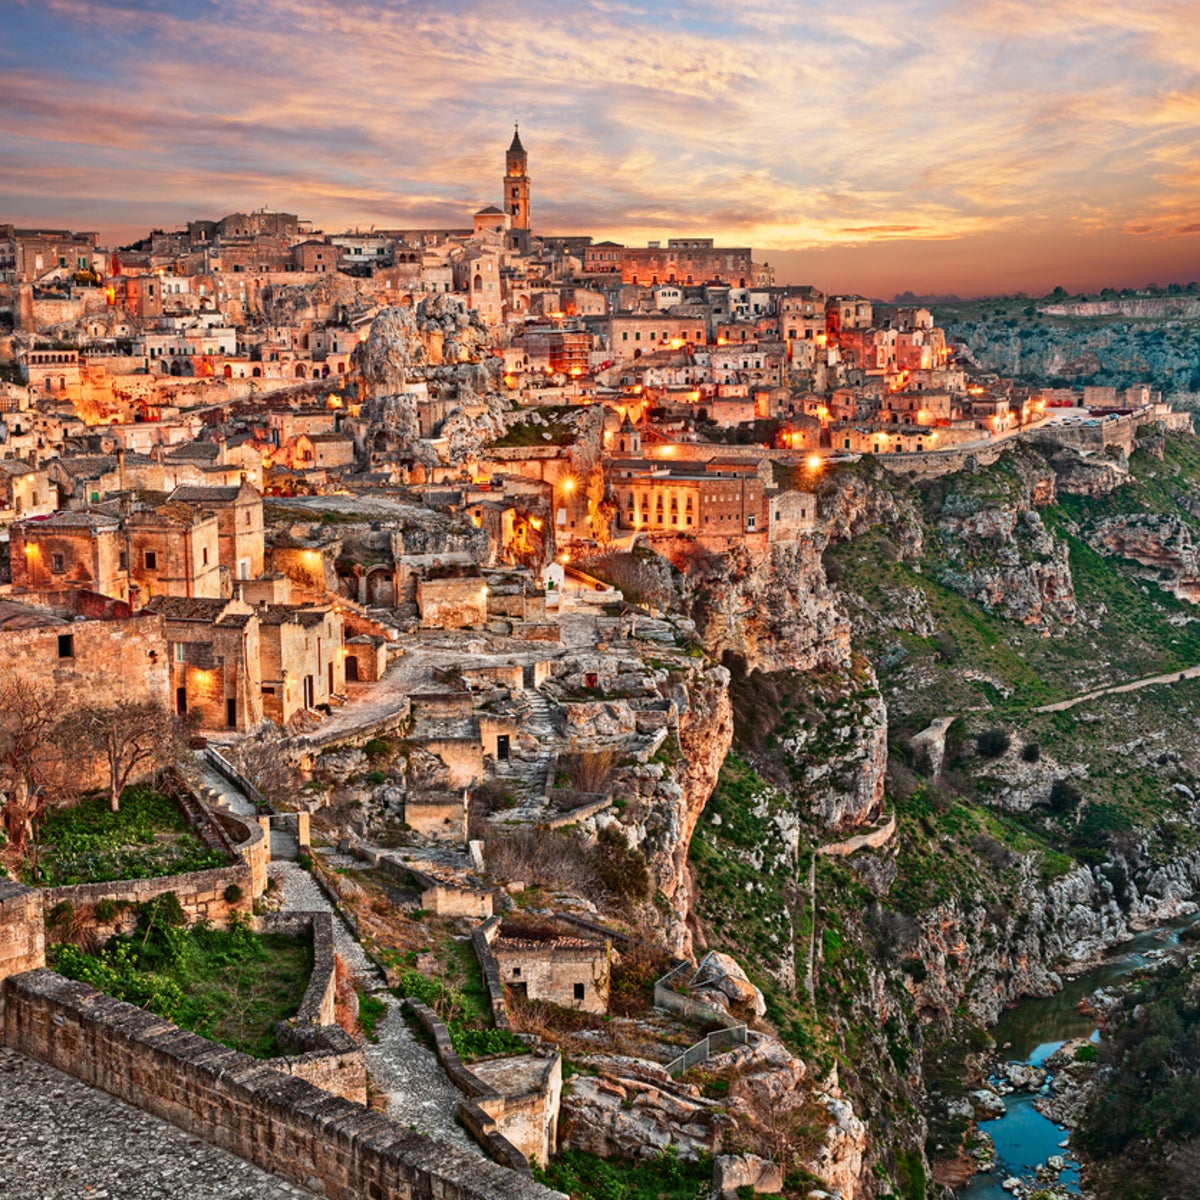 Matera city guide: Where to eat, drink, shop and stay | The Independent